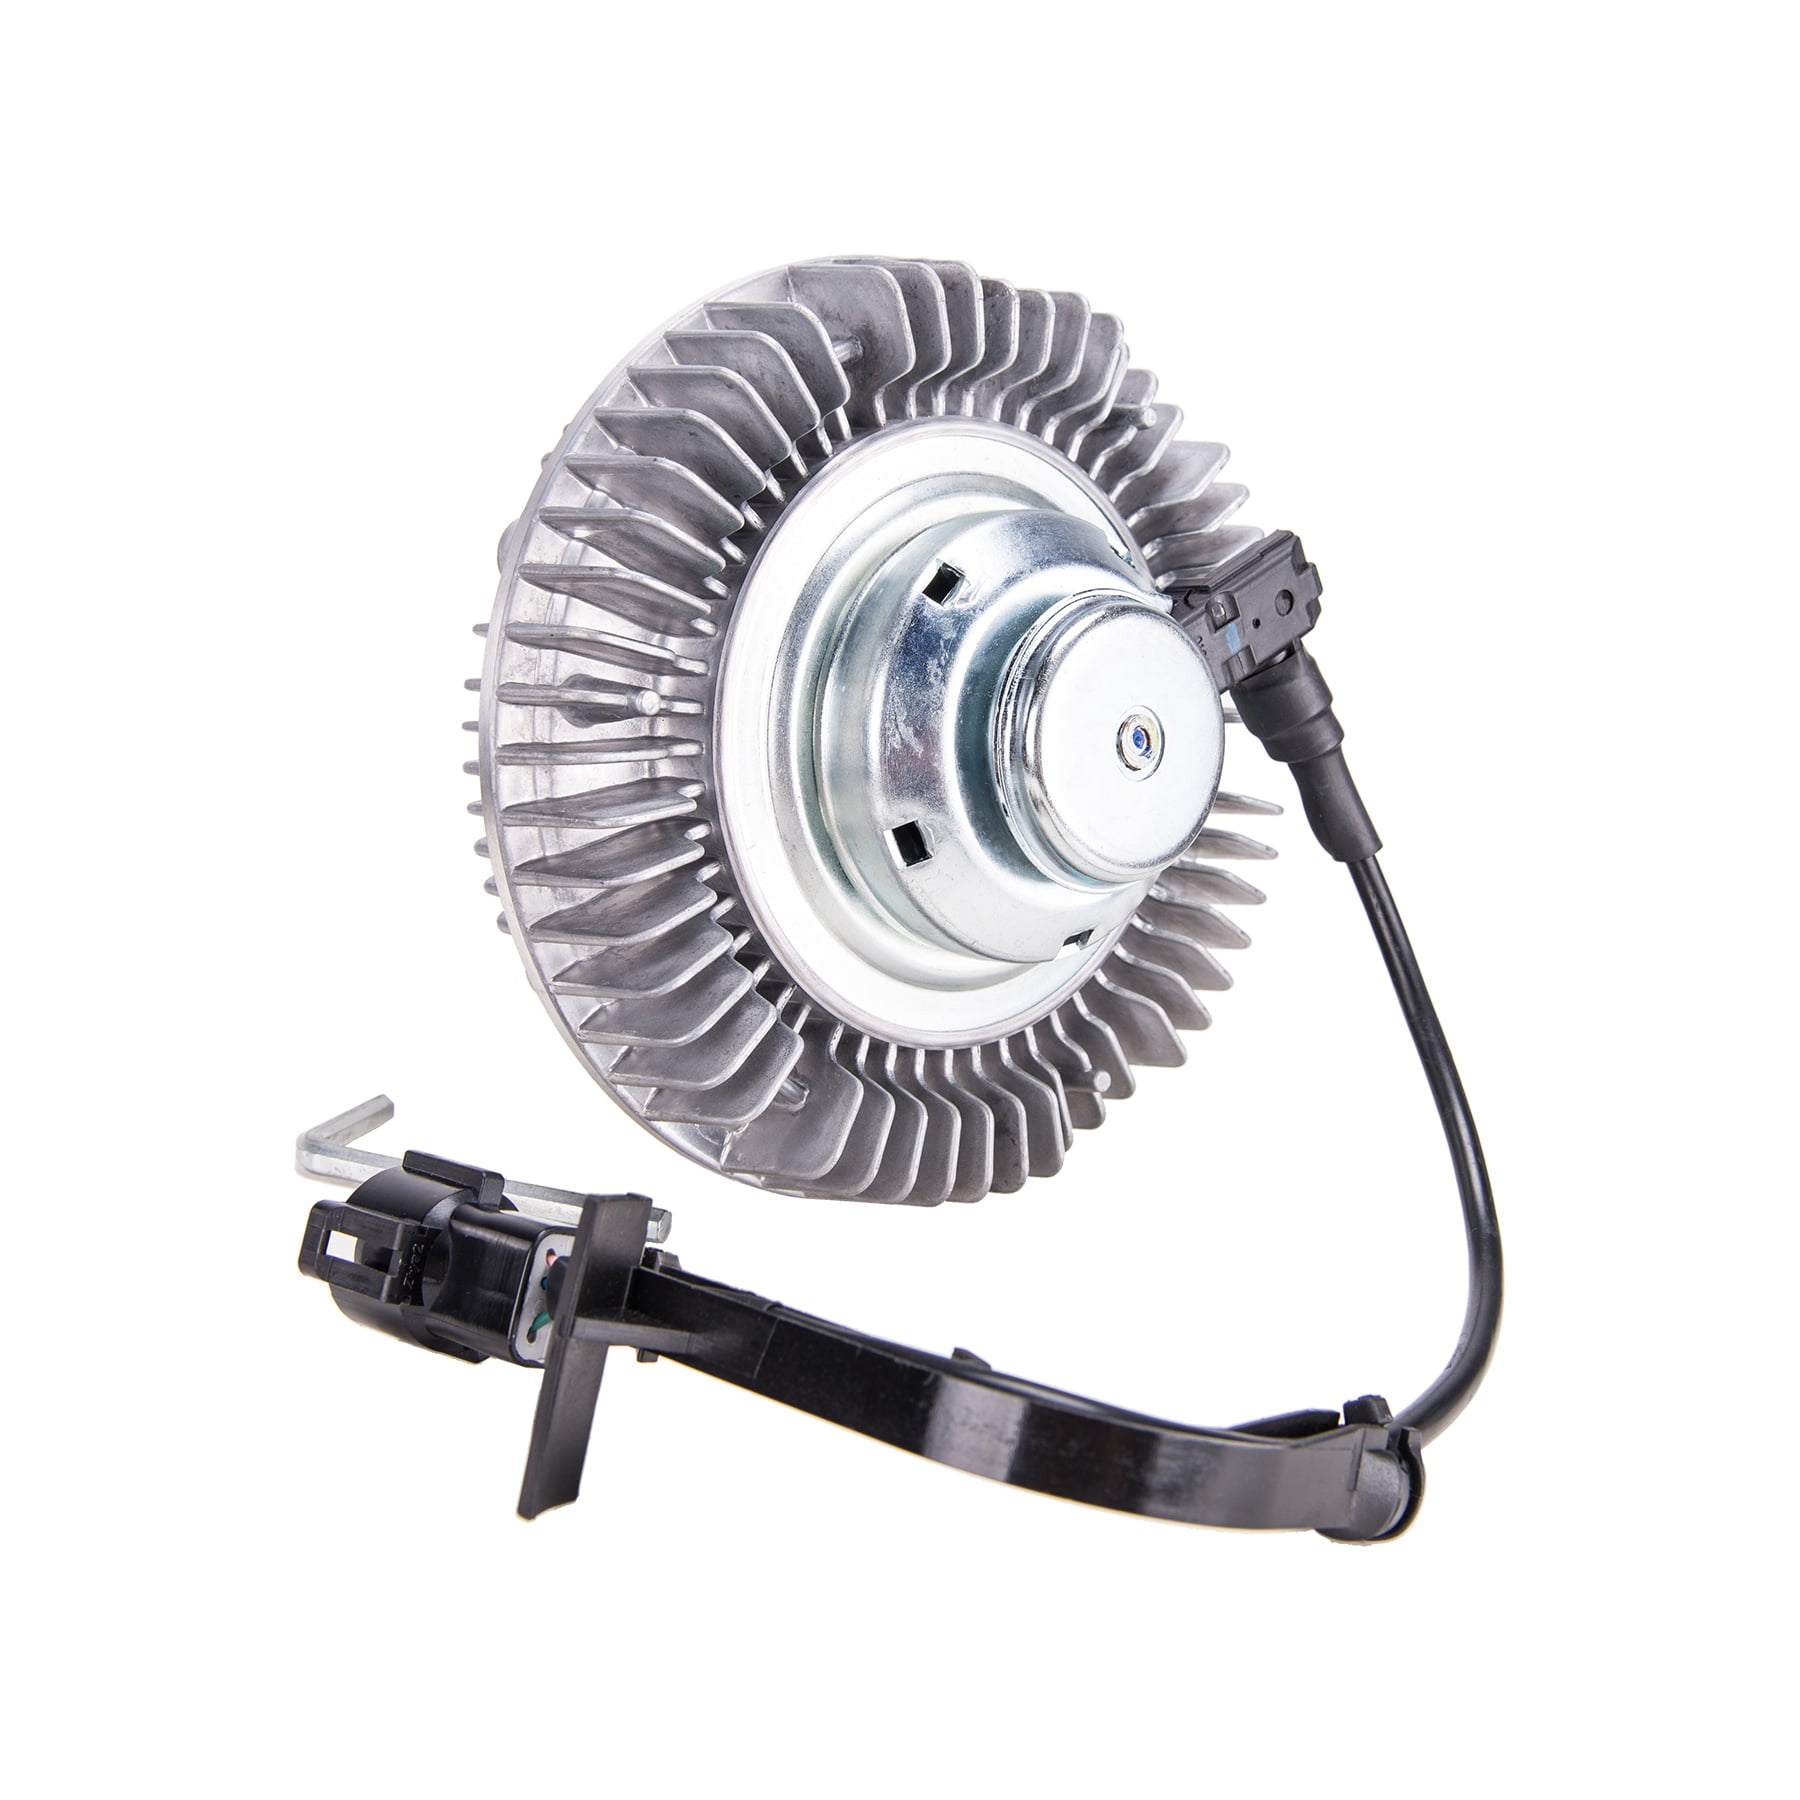 Electric Radiator Cooling Fan Clutch For Ford Super Duty F250 6.0L V8 Diesel New